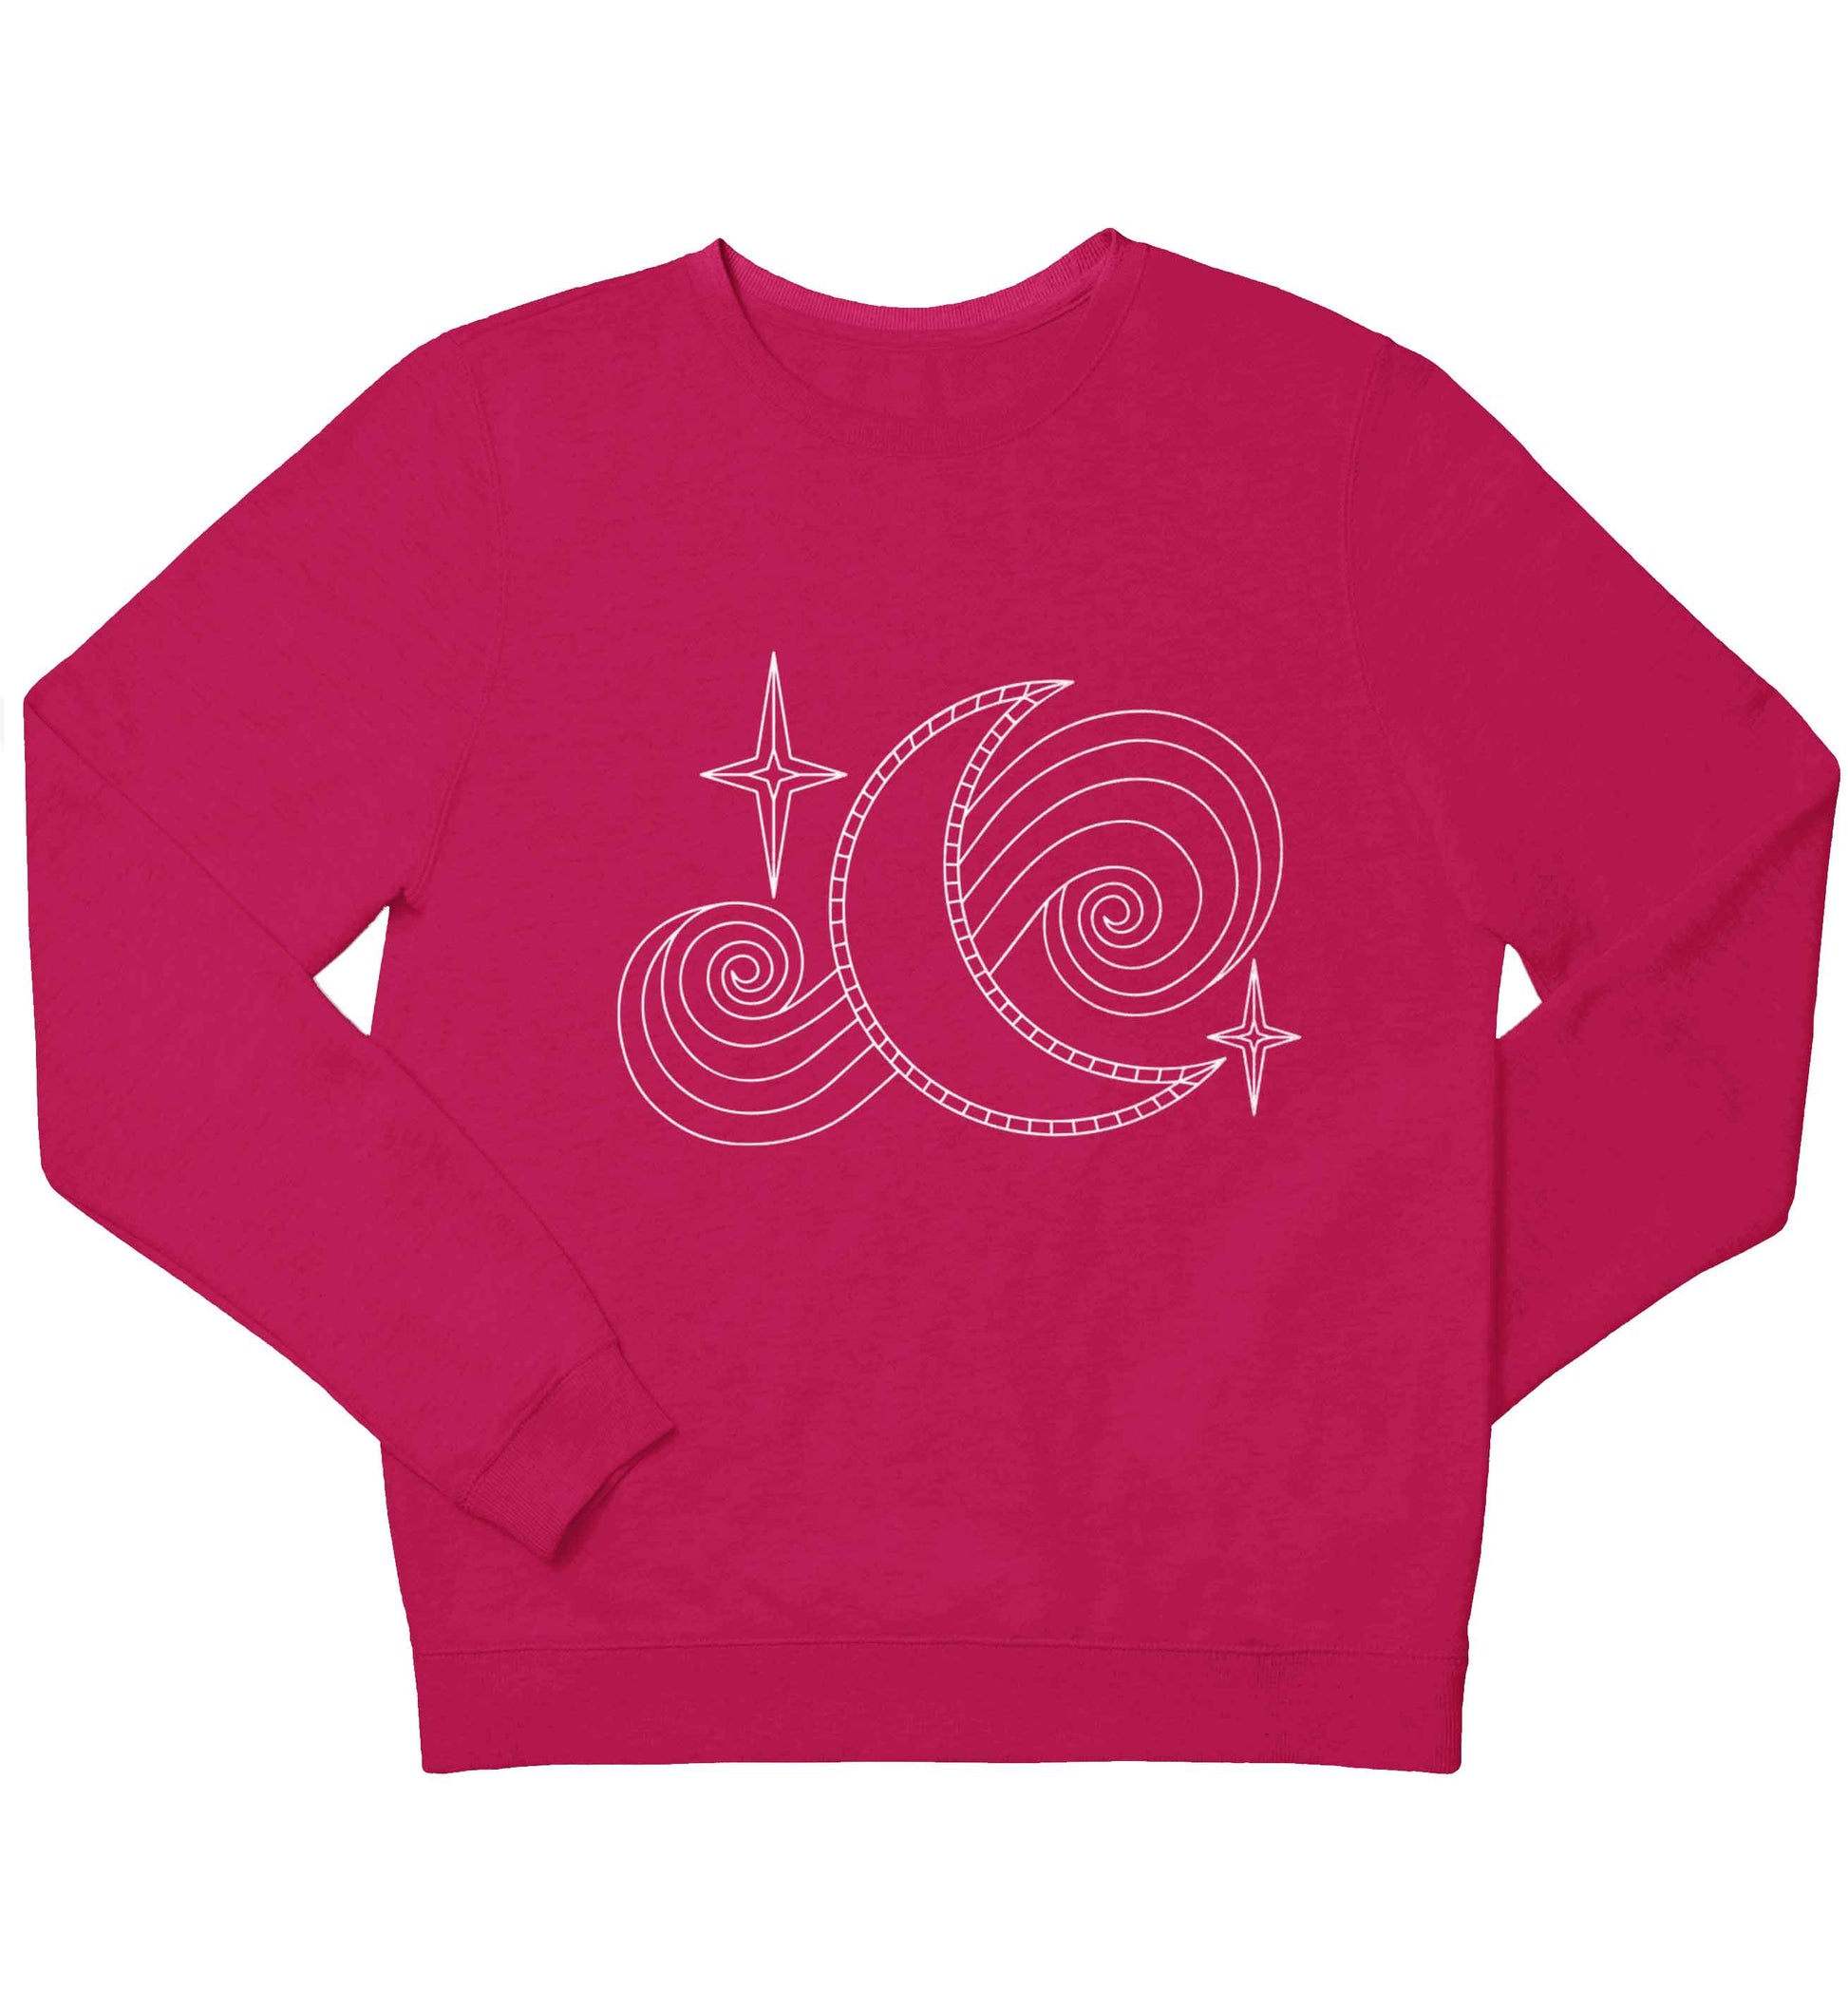 Moon and stars illustration children's pink sweater 12-13 Years